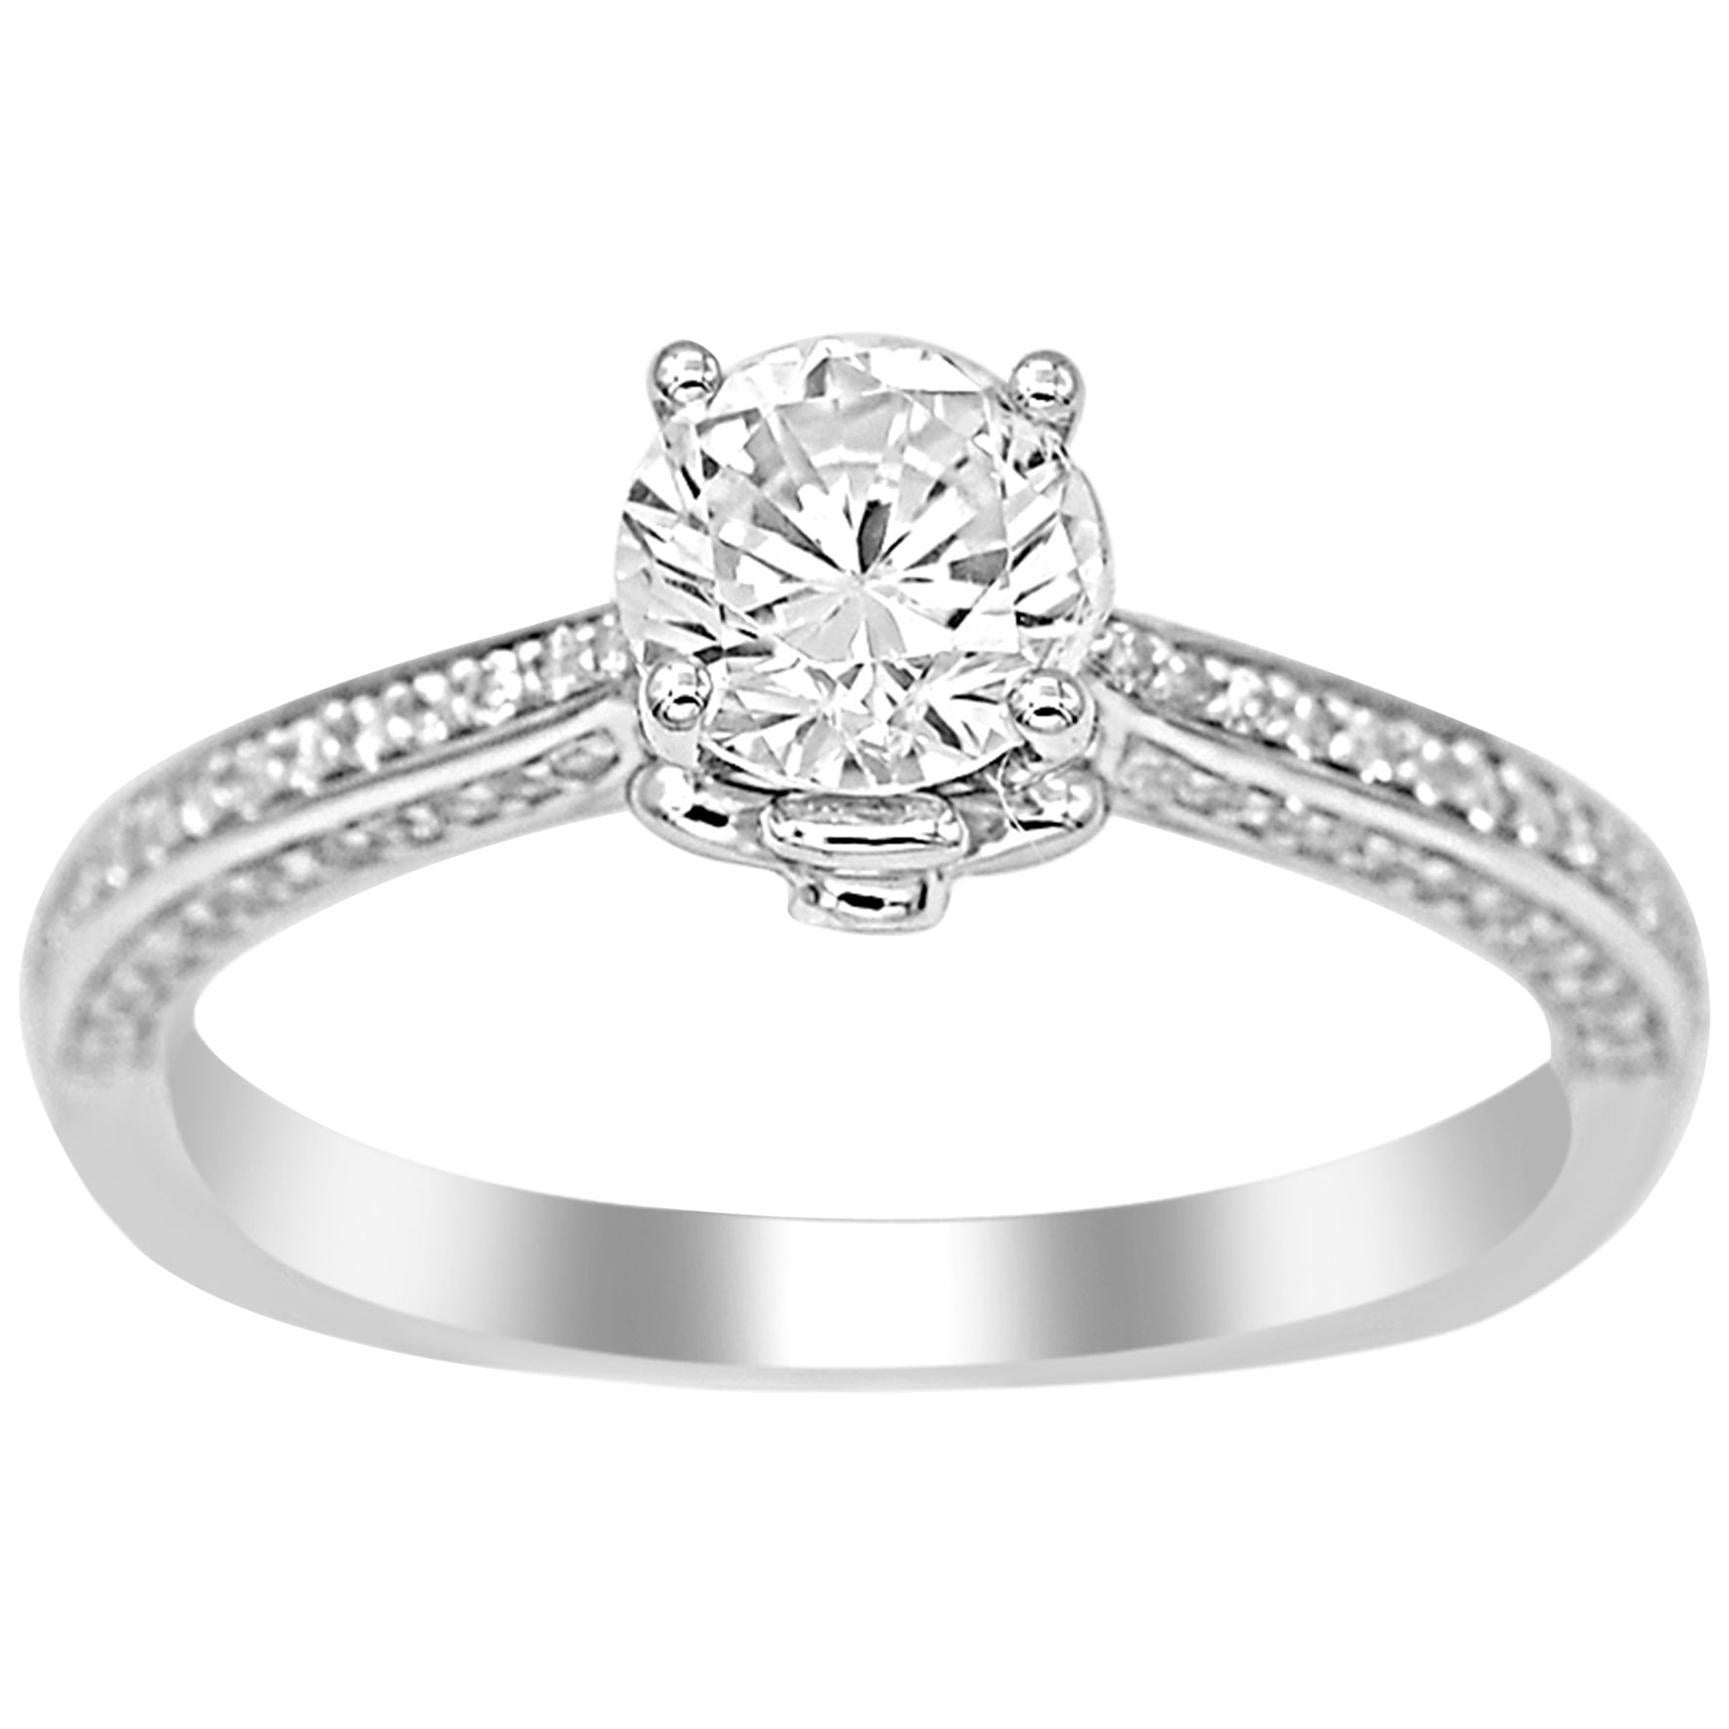 TJD 1.00 Carat Round Diamond 18K White Gold Engagement Ring with Shoulder Stones For Sale